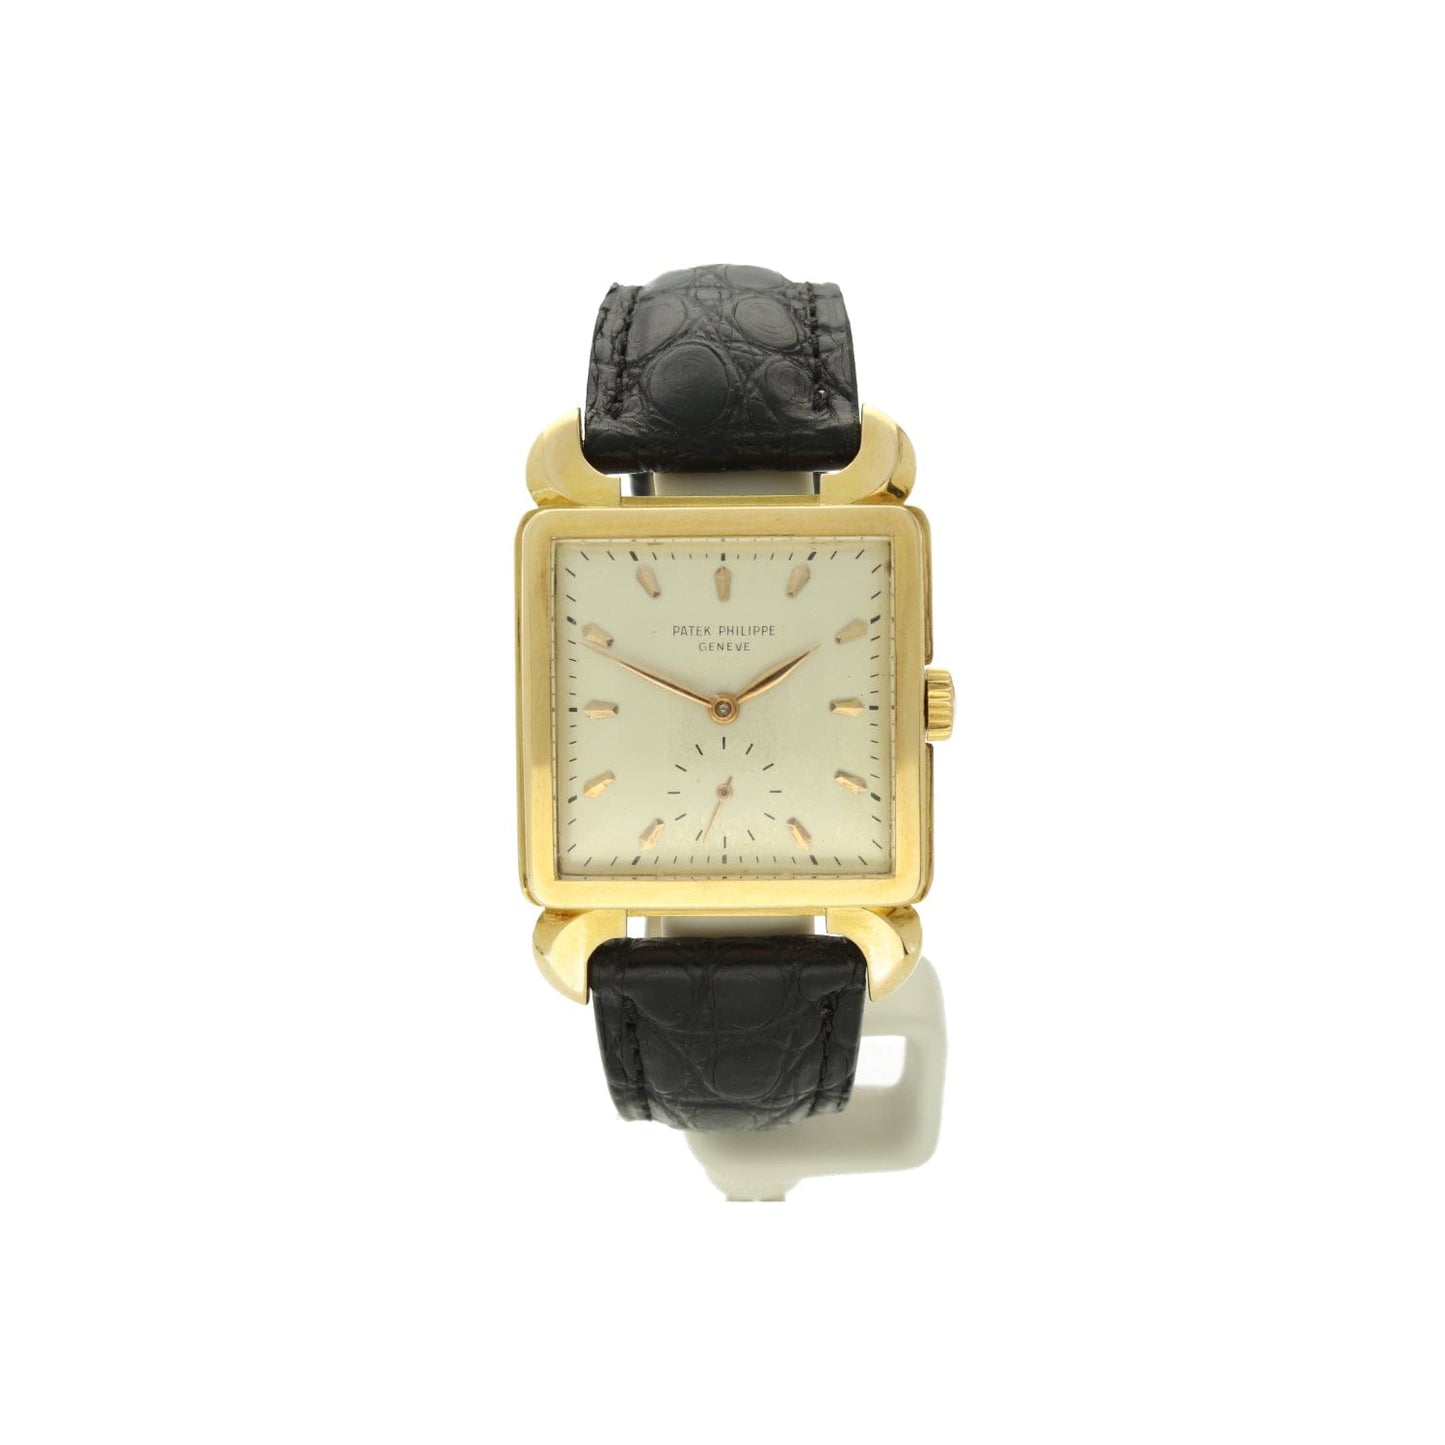 18ct rose gold, reference 2423 wristwatch. Made 1950